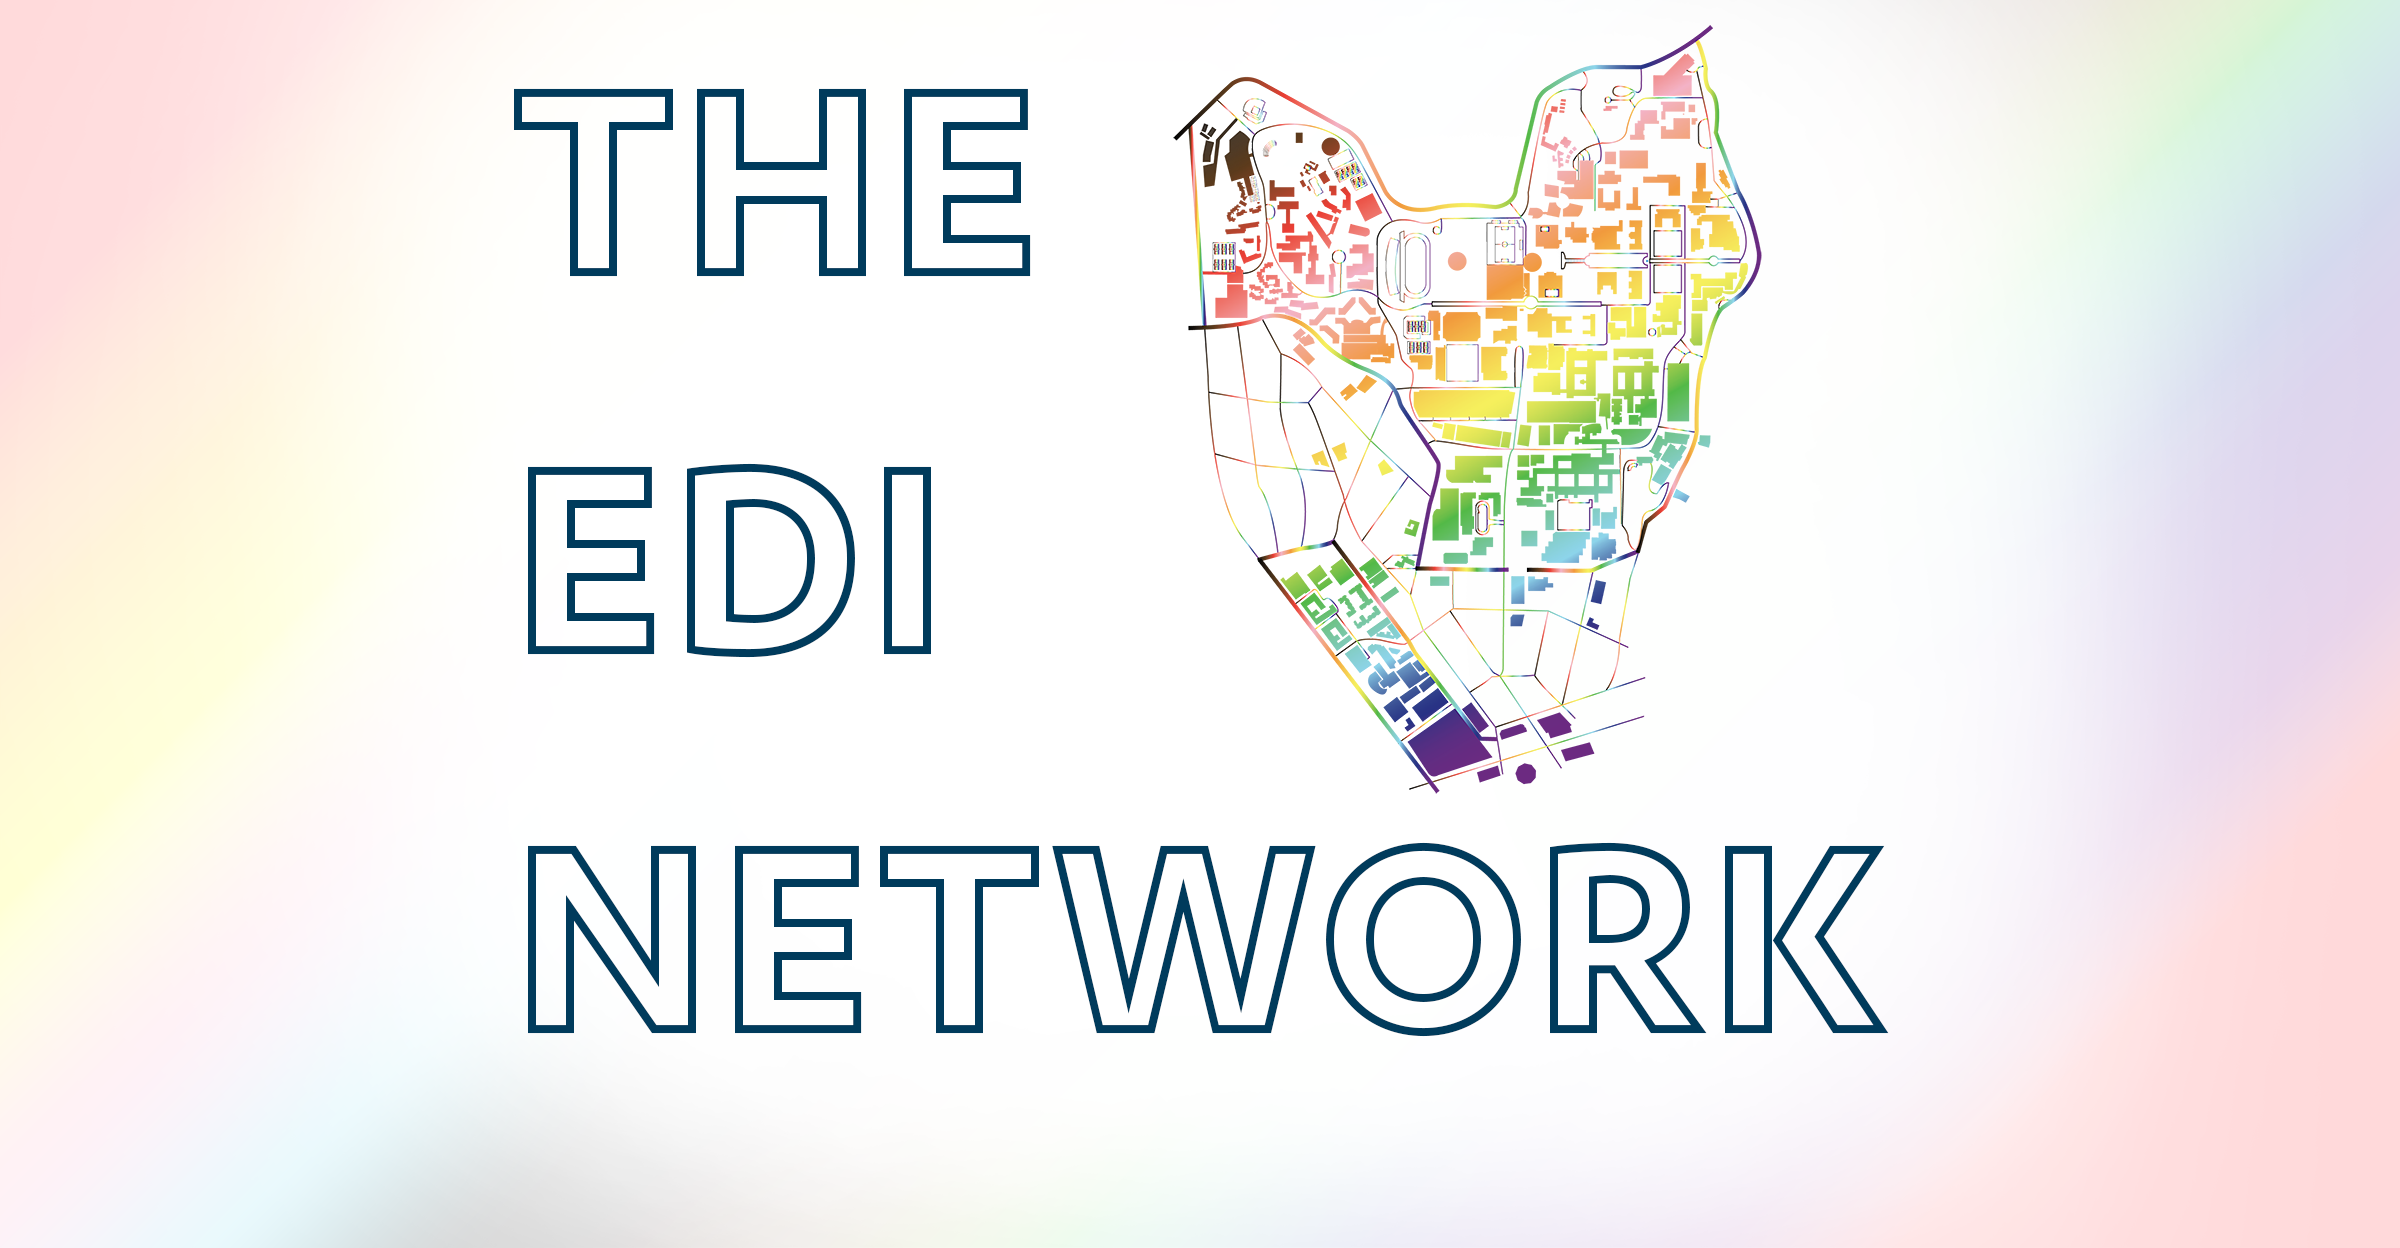 A map of UCLA overlaid with a rainbow gradient. “The EDI Network